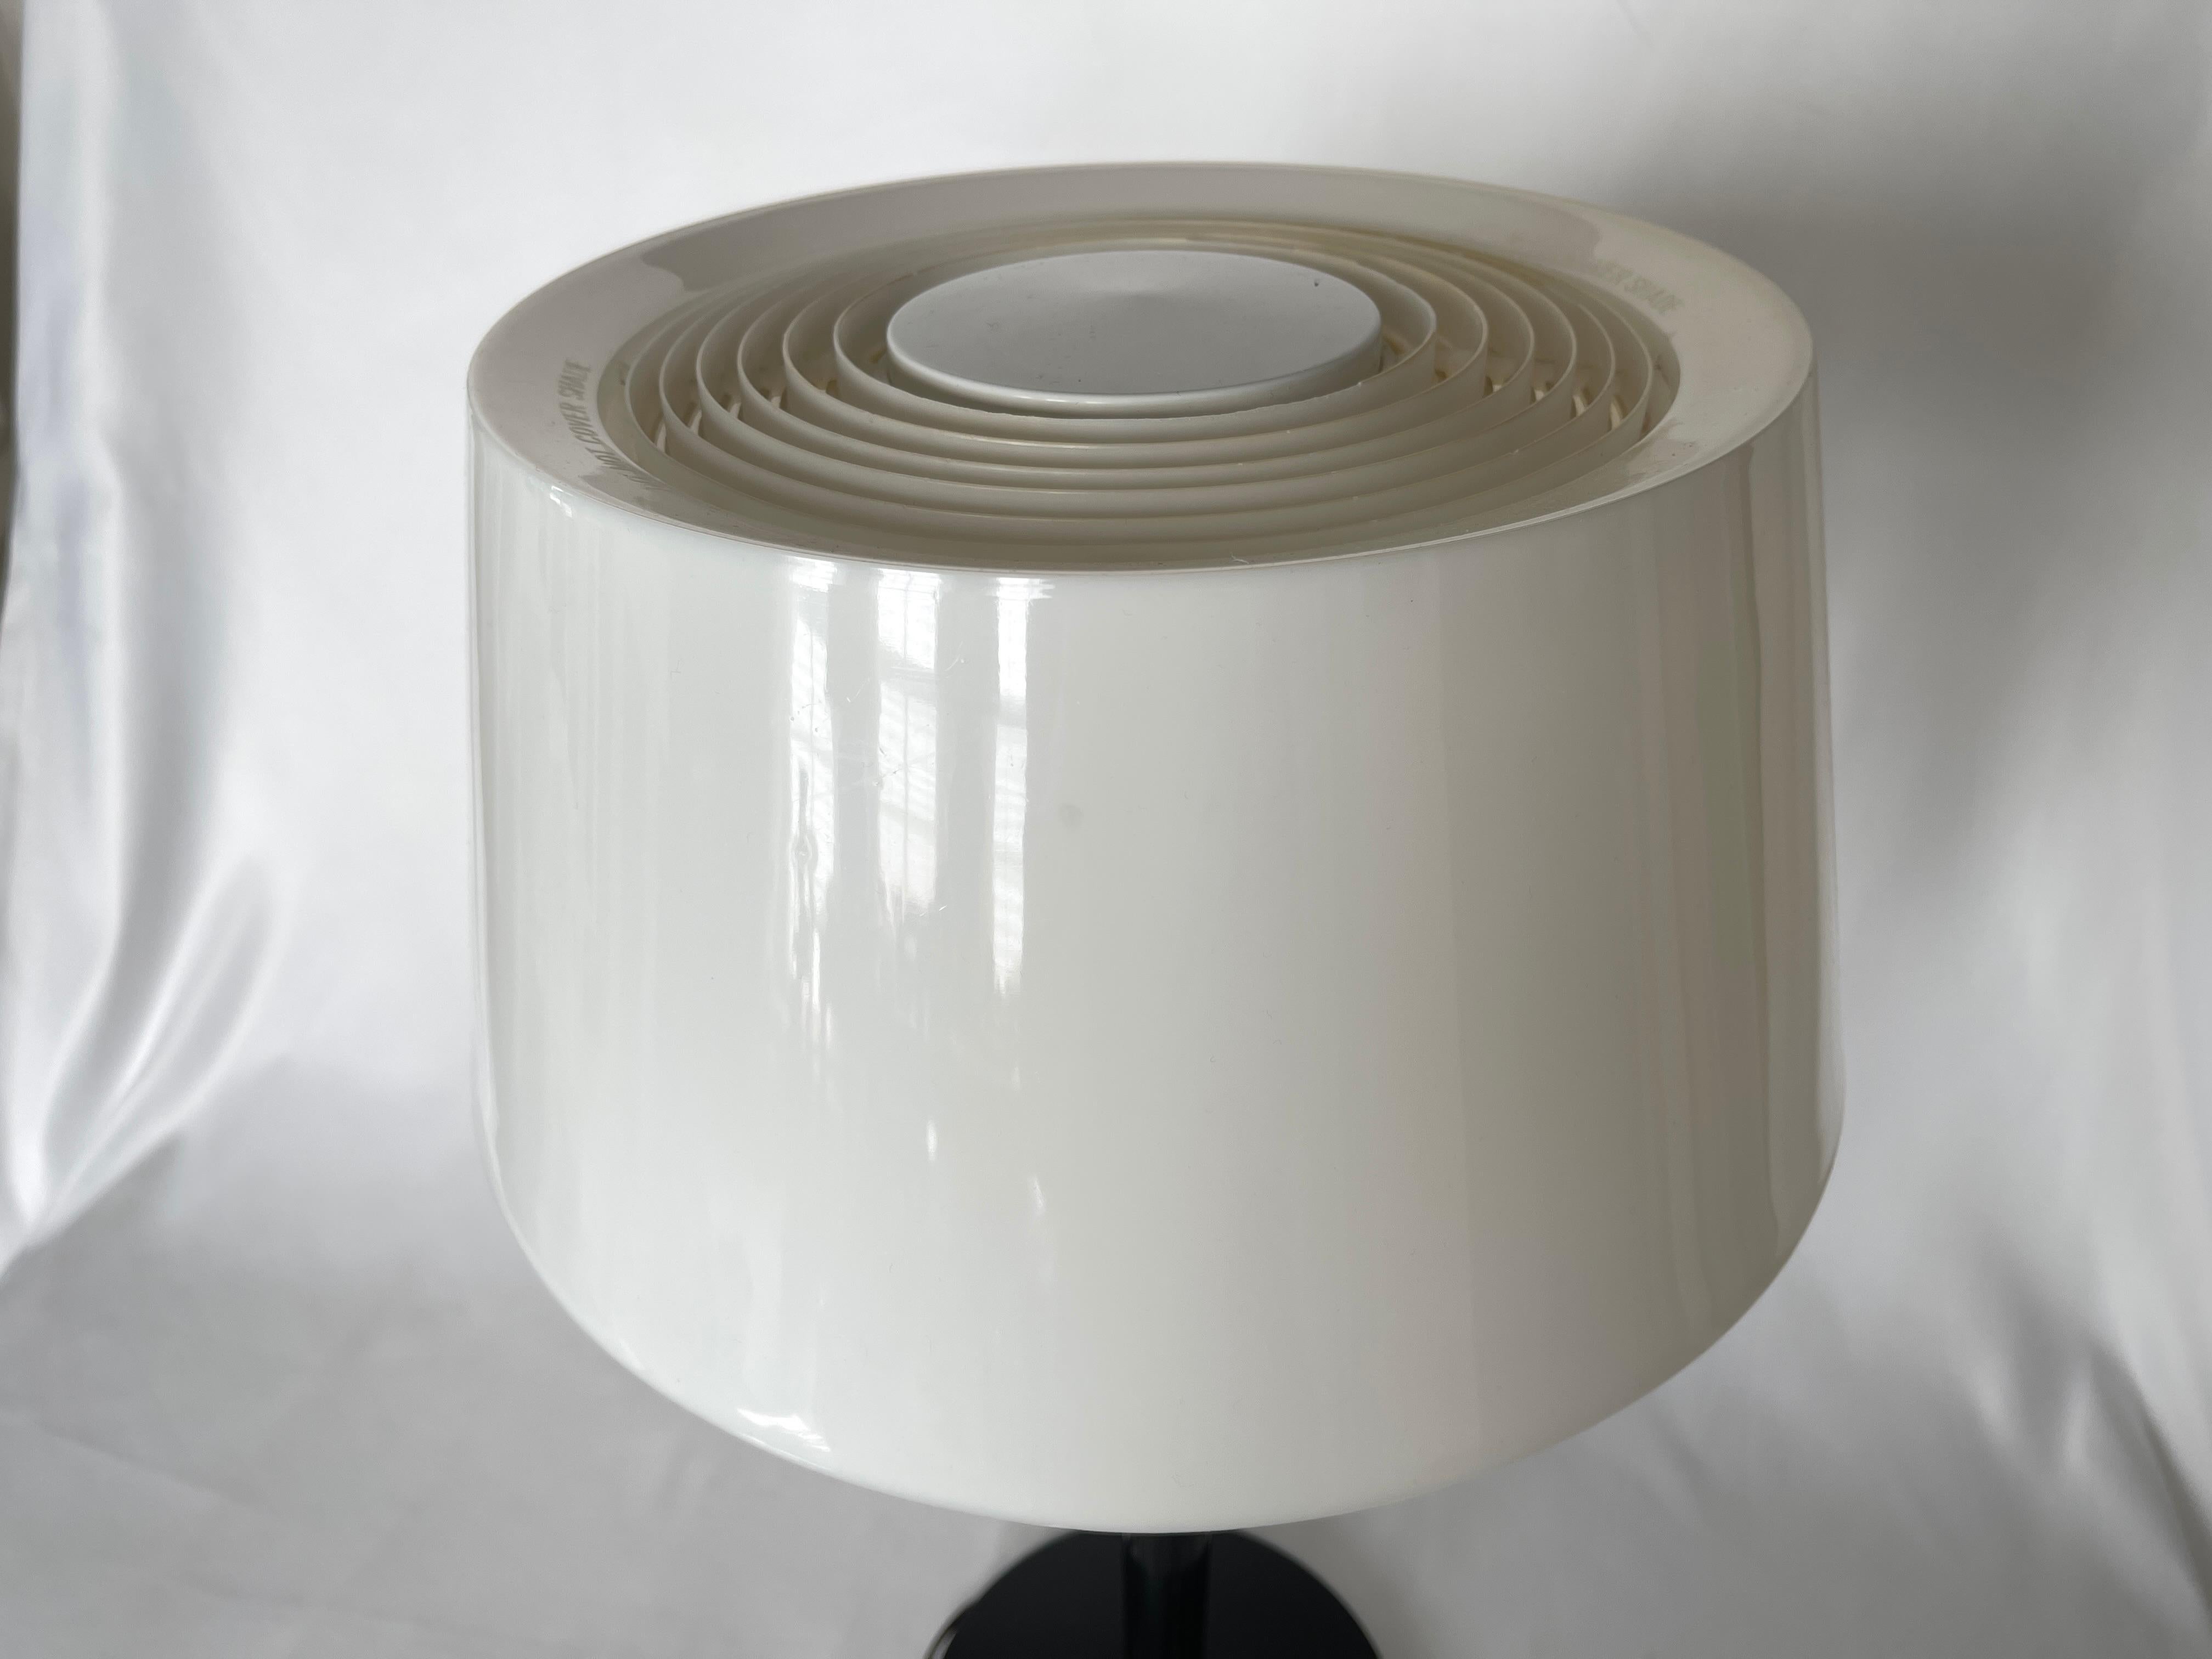 Gerald Thurston for lightolier basic concept table lamp with black lacquered steel base and lamp stem, white acrylic drum shade and plastic diffuser underneath. Metal lamp switch on base. 
Made in USA c, 1970's.

